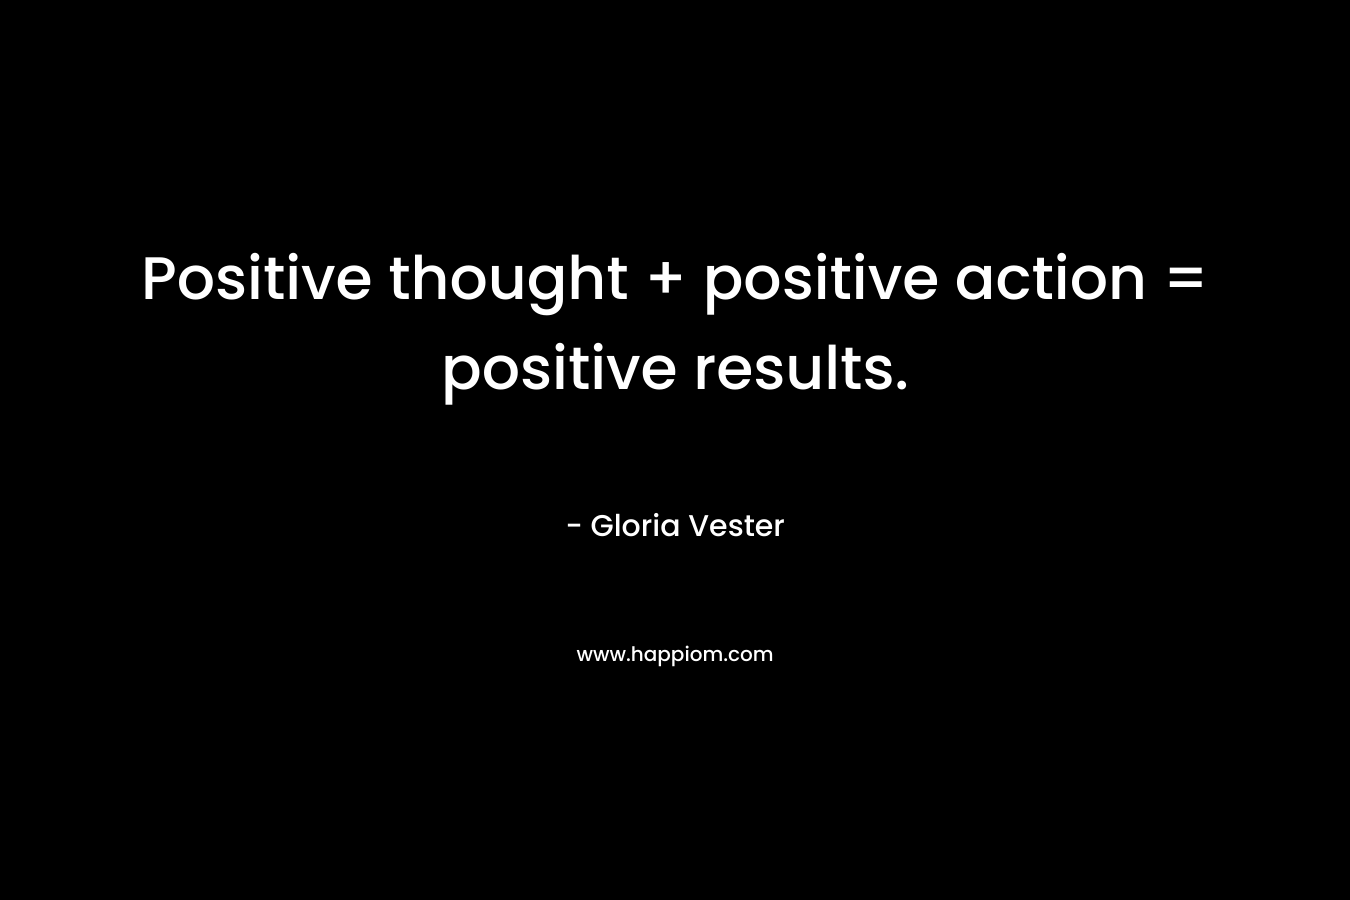 Positive thought + positive action = positive results.